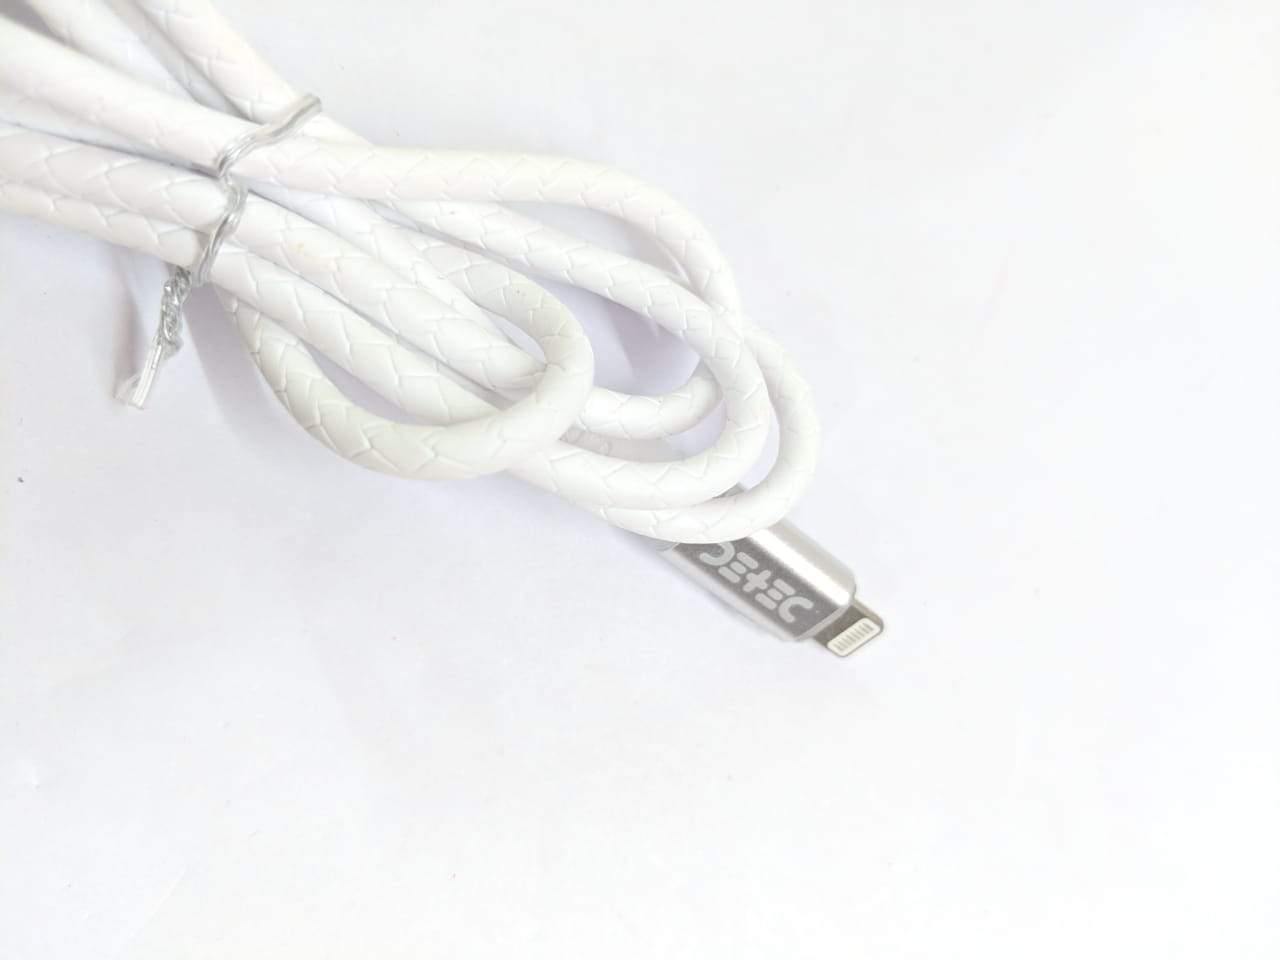 Detec Data Cable. Lightning Port - USB 2.0 - Apple port - Detech Devices Private Limited